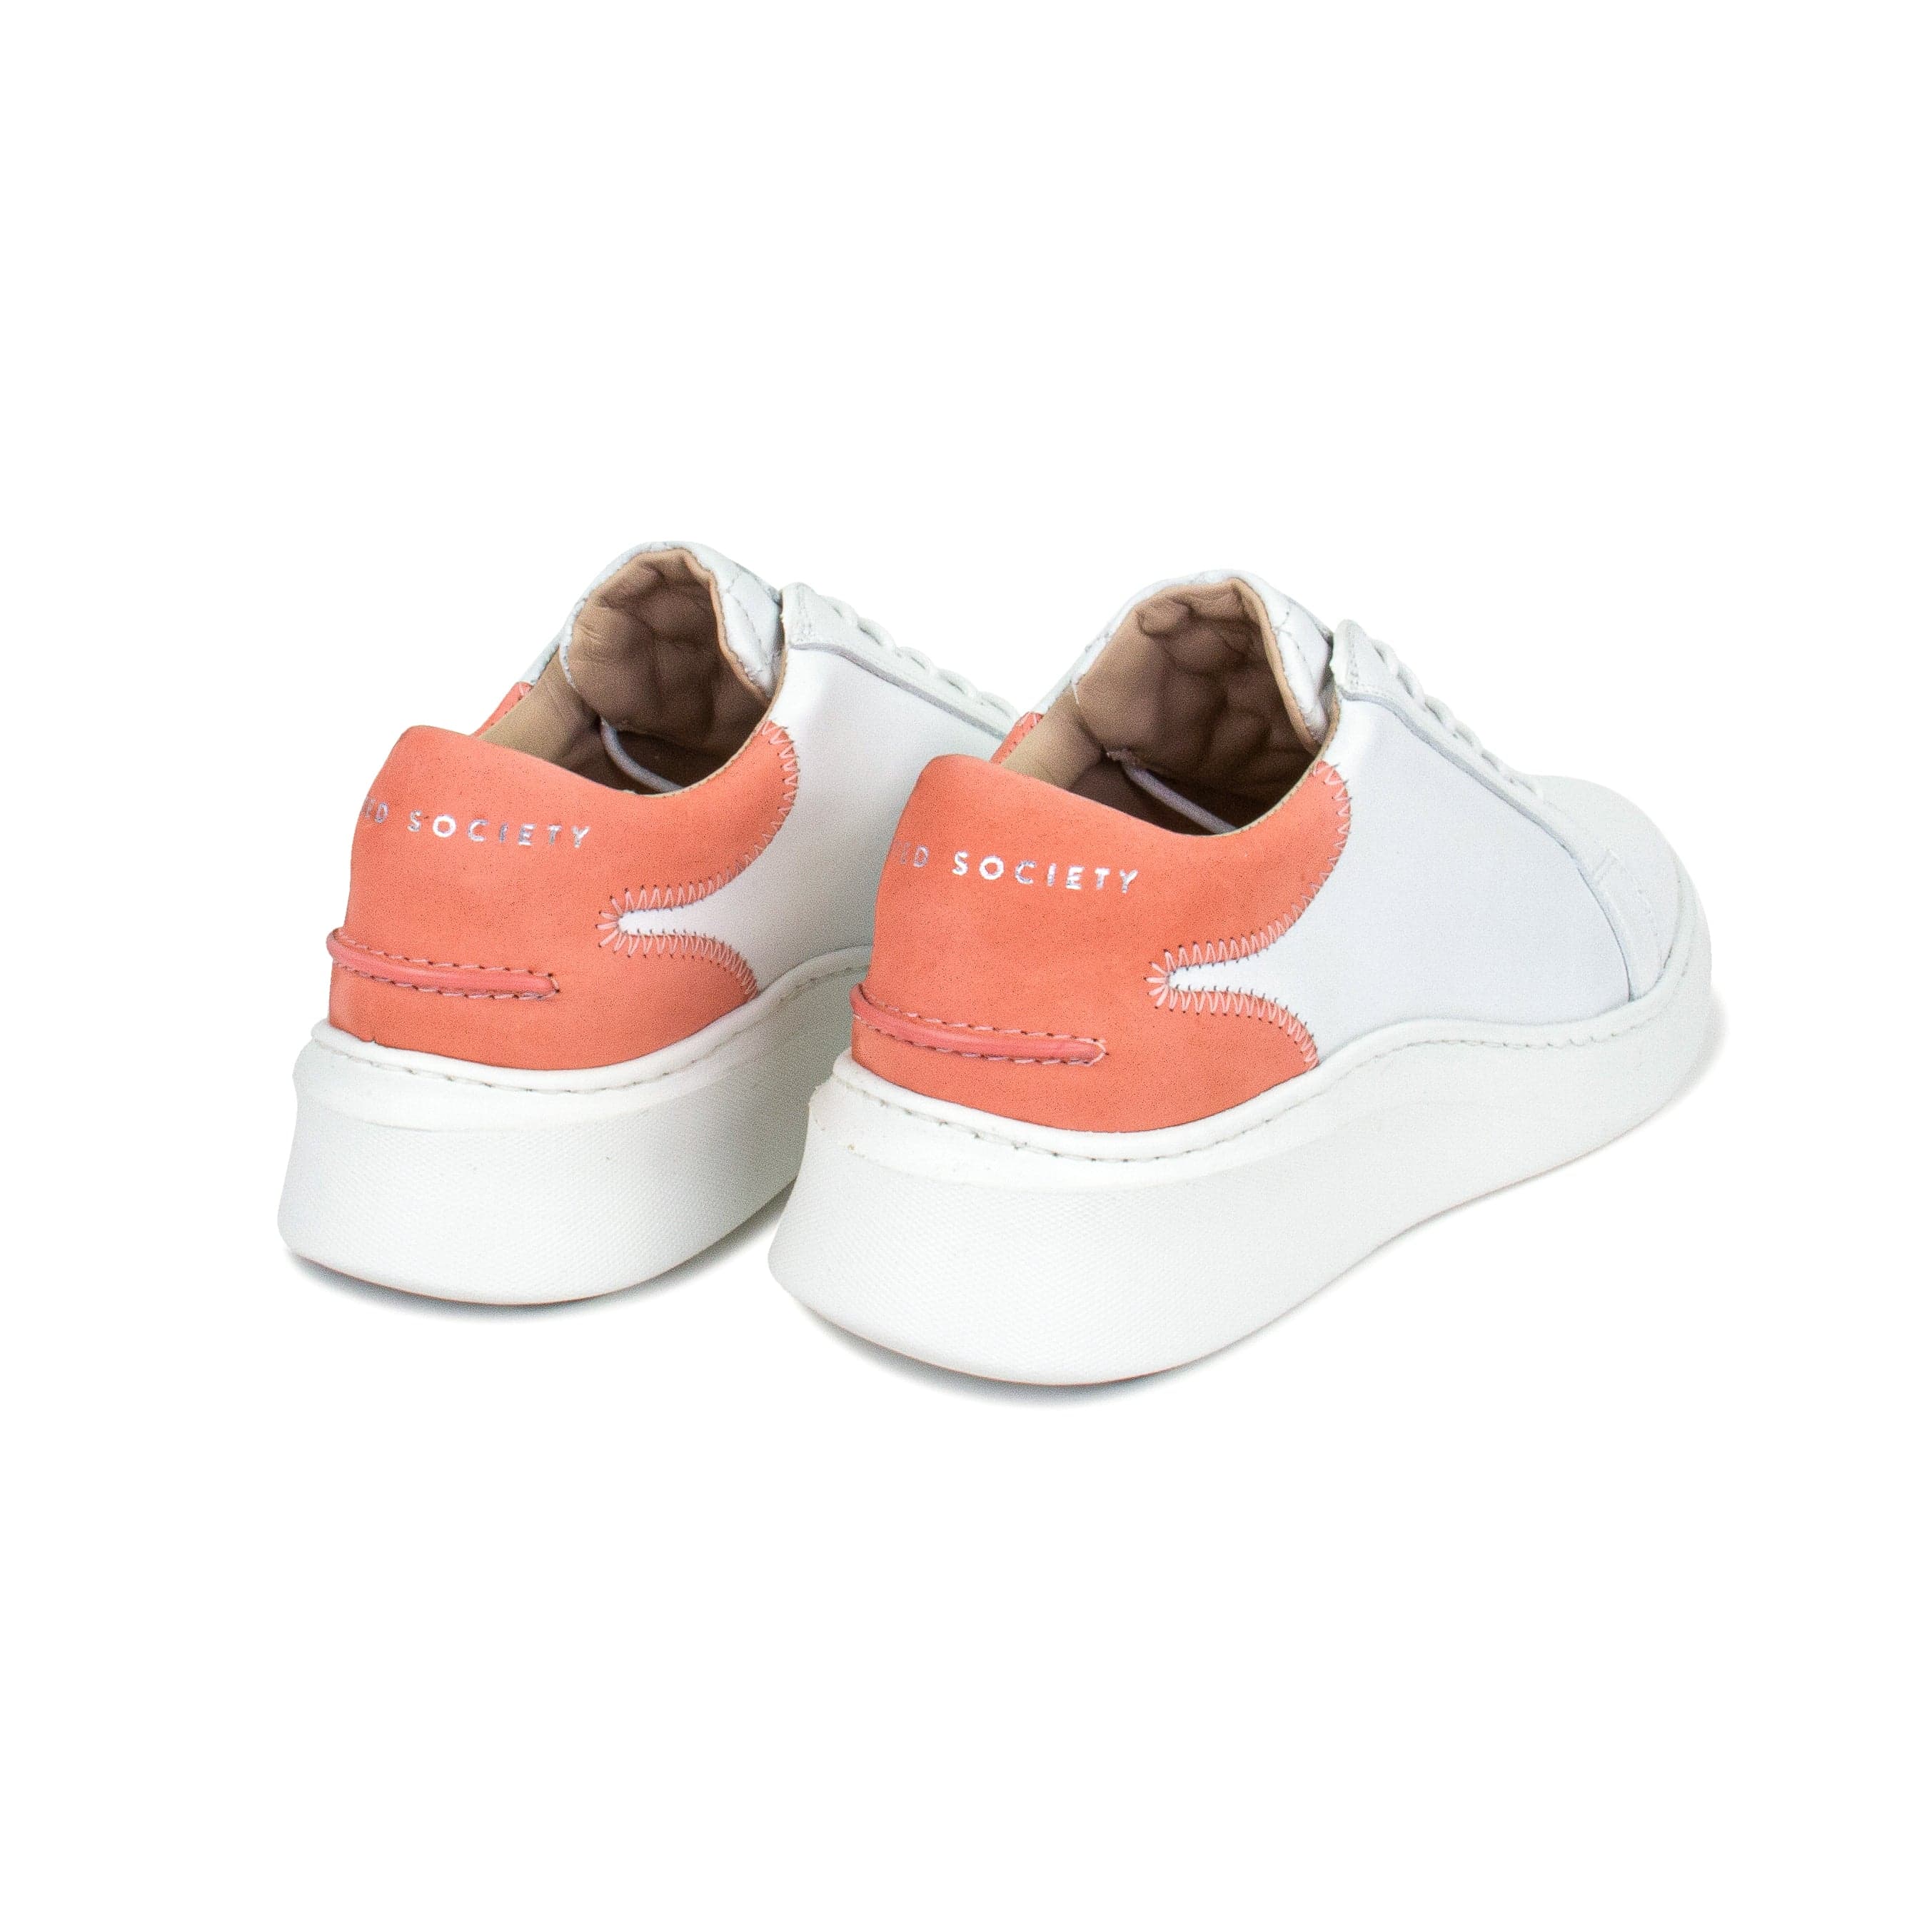 Matteo Low Top Sneaker | White & Rose Full Grain Leather | White Outsole | Made in Italy | Size 37 & 39